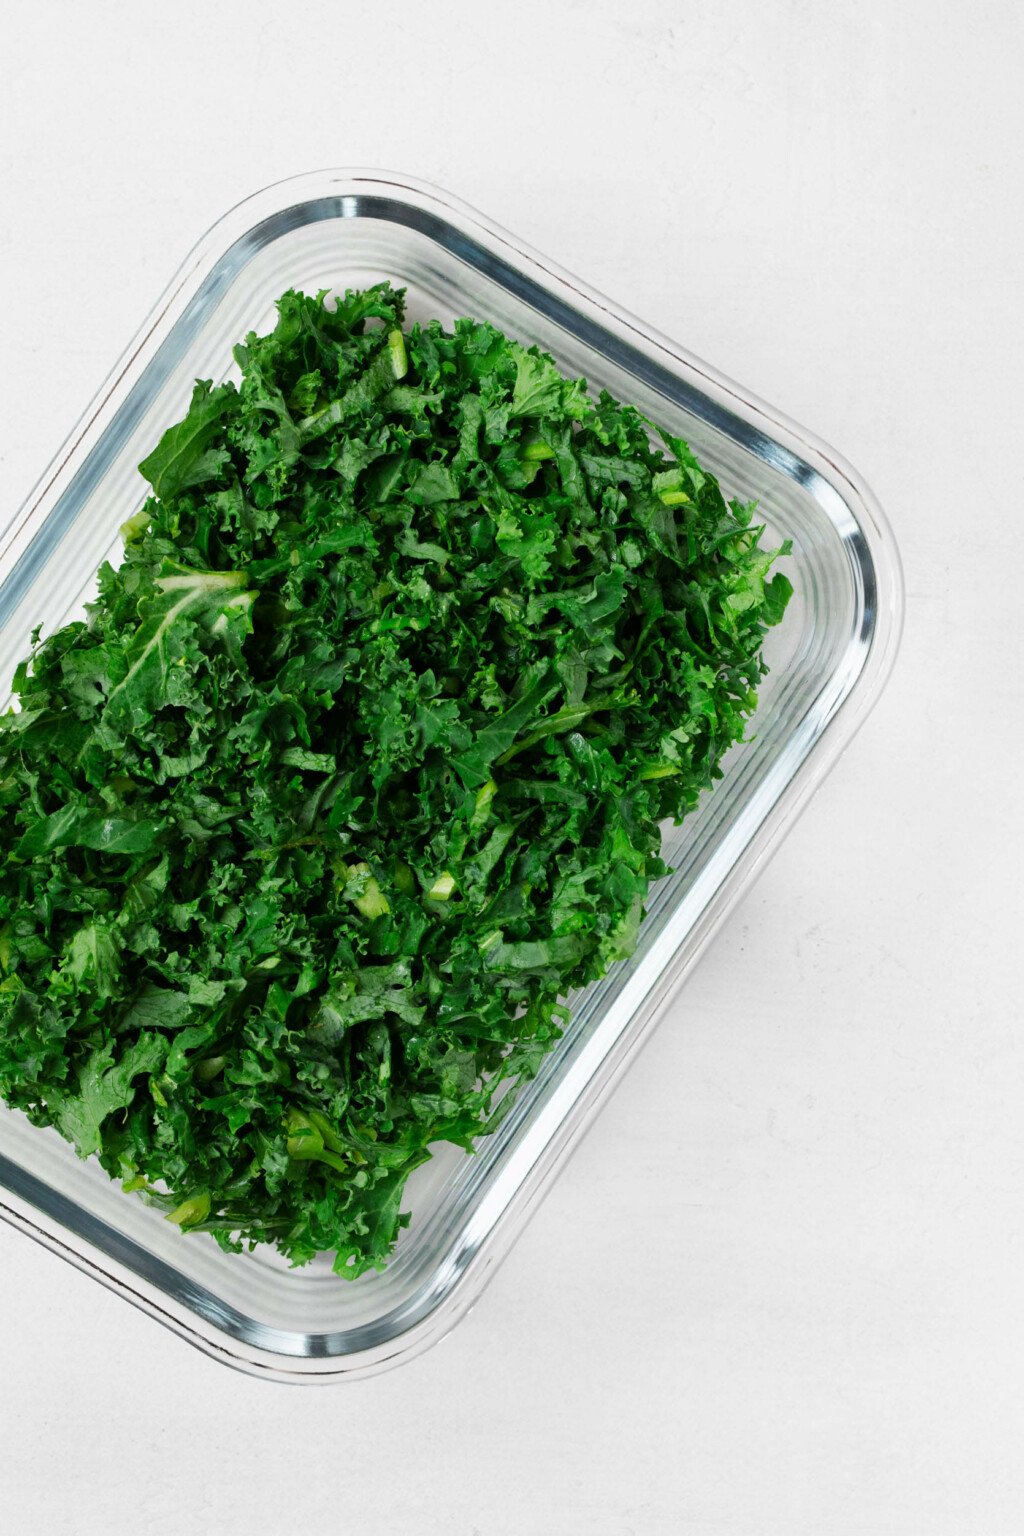 A glass storage container holds bright green pieces of chopped kale.